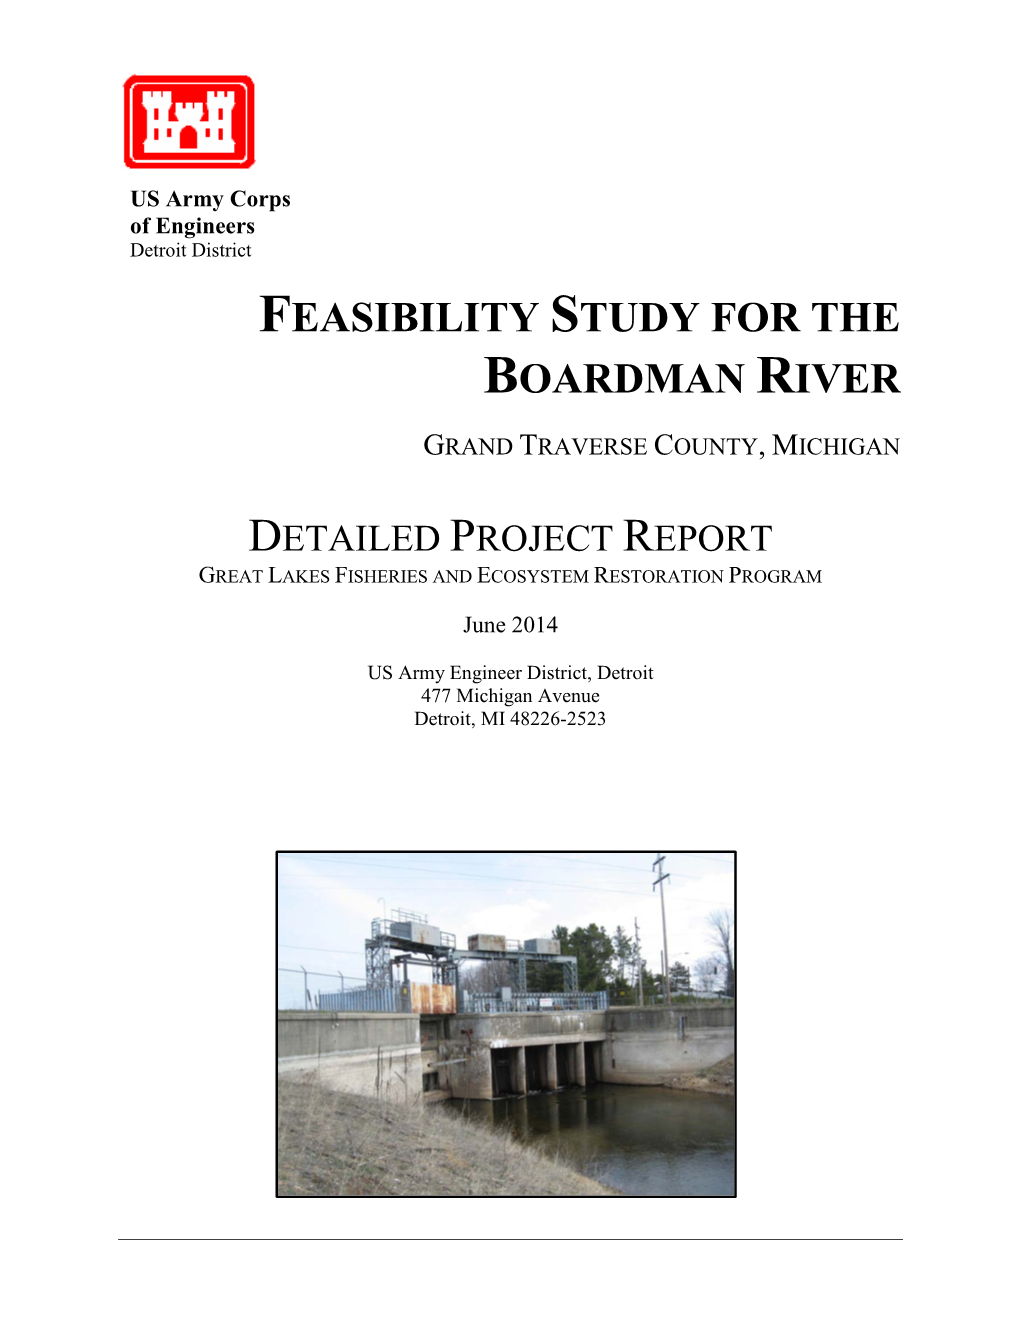 Feasibility Study for the Boardman River Detailed Project Report